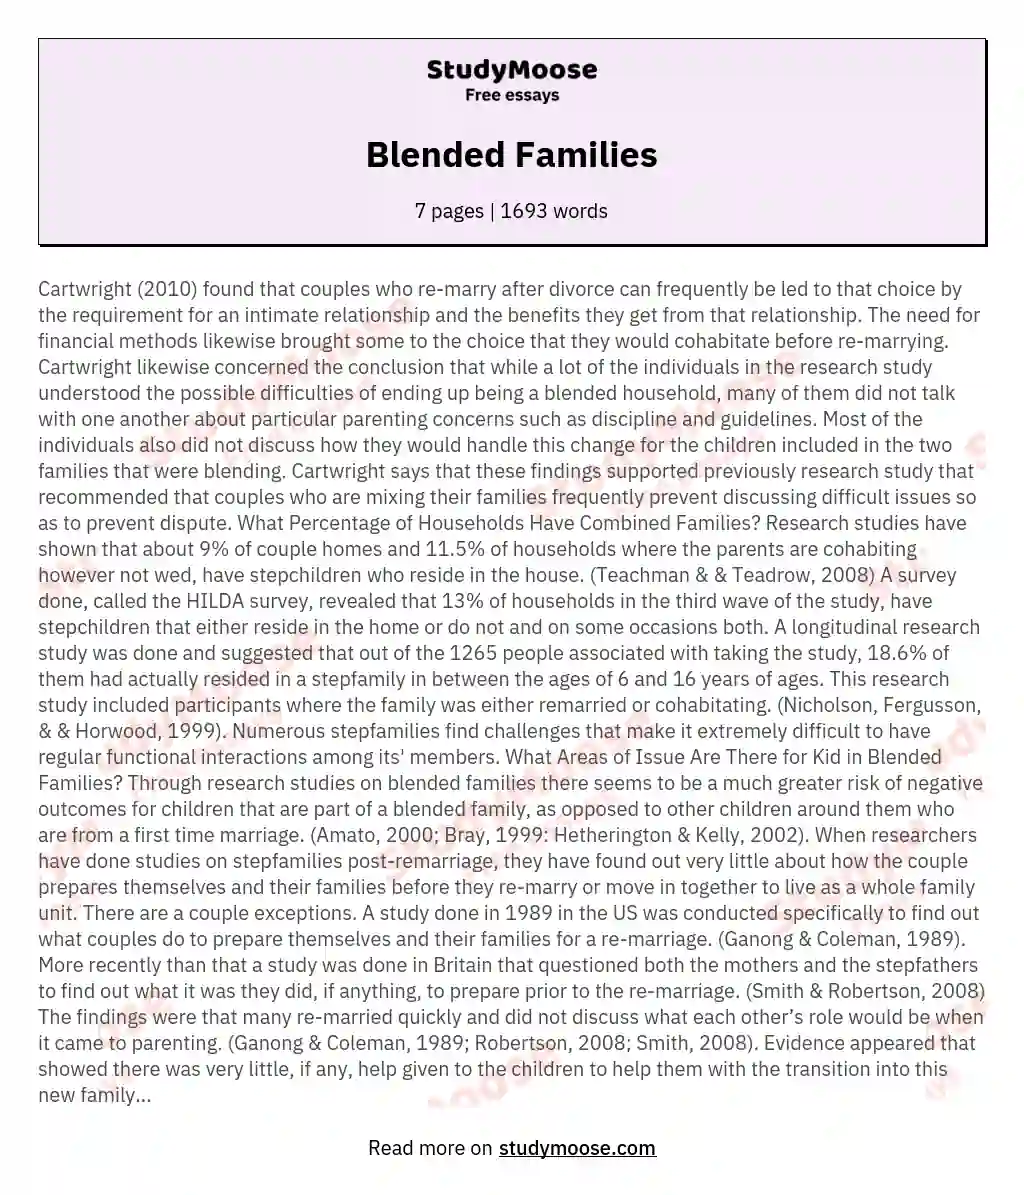 Blended Families essay